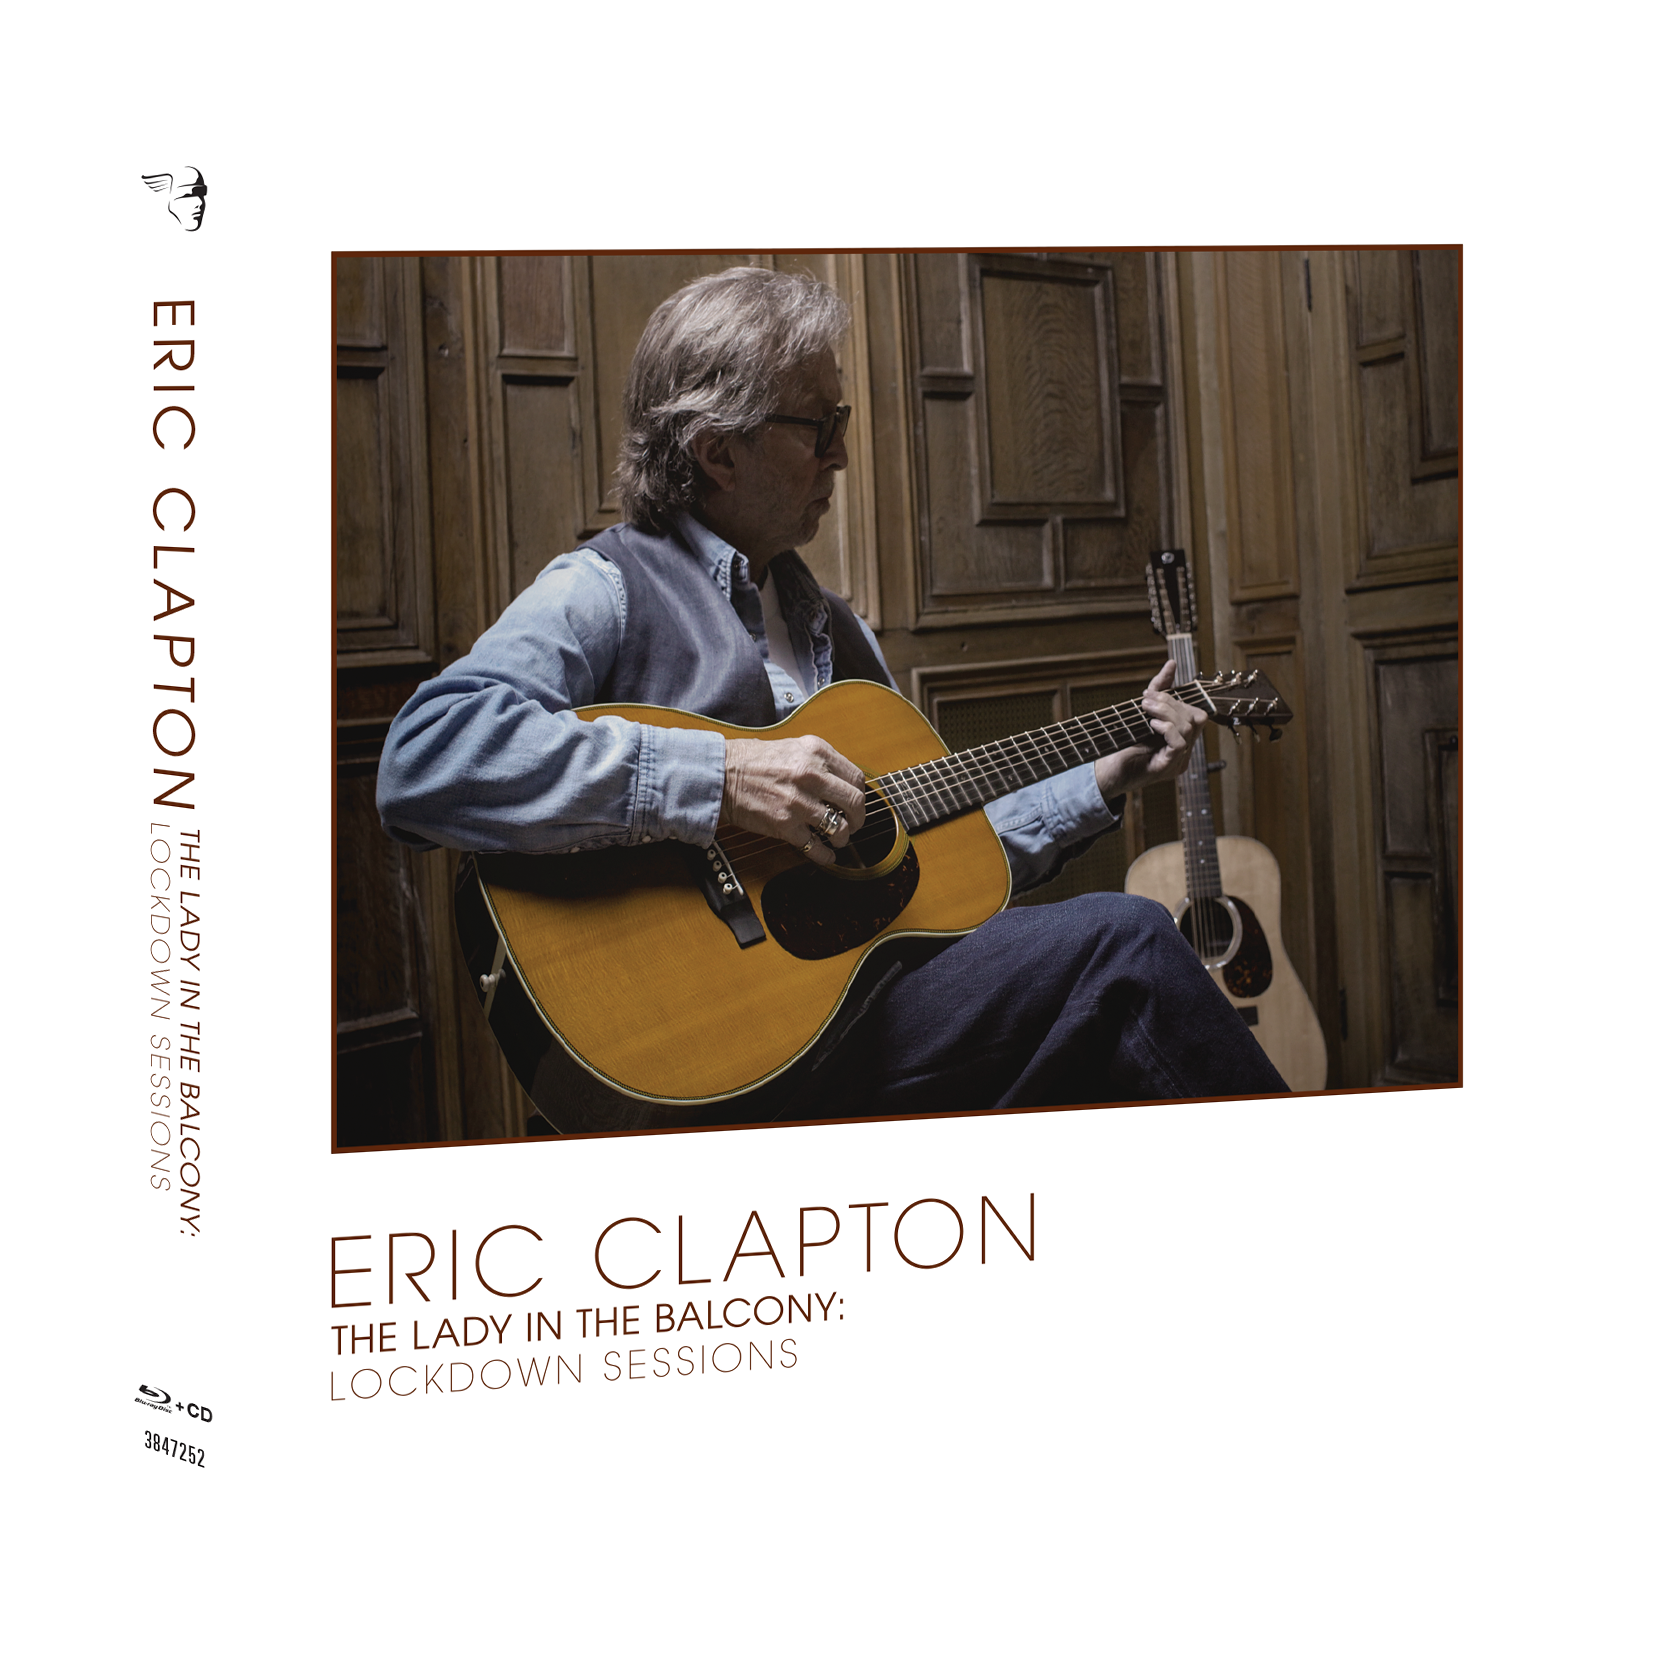 Eric Clapton - The Lady In The Balcony - Lockdown Sessions: Blu-Ray + CD